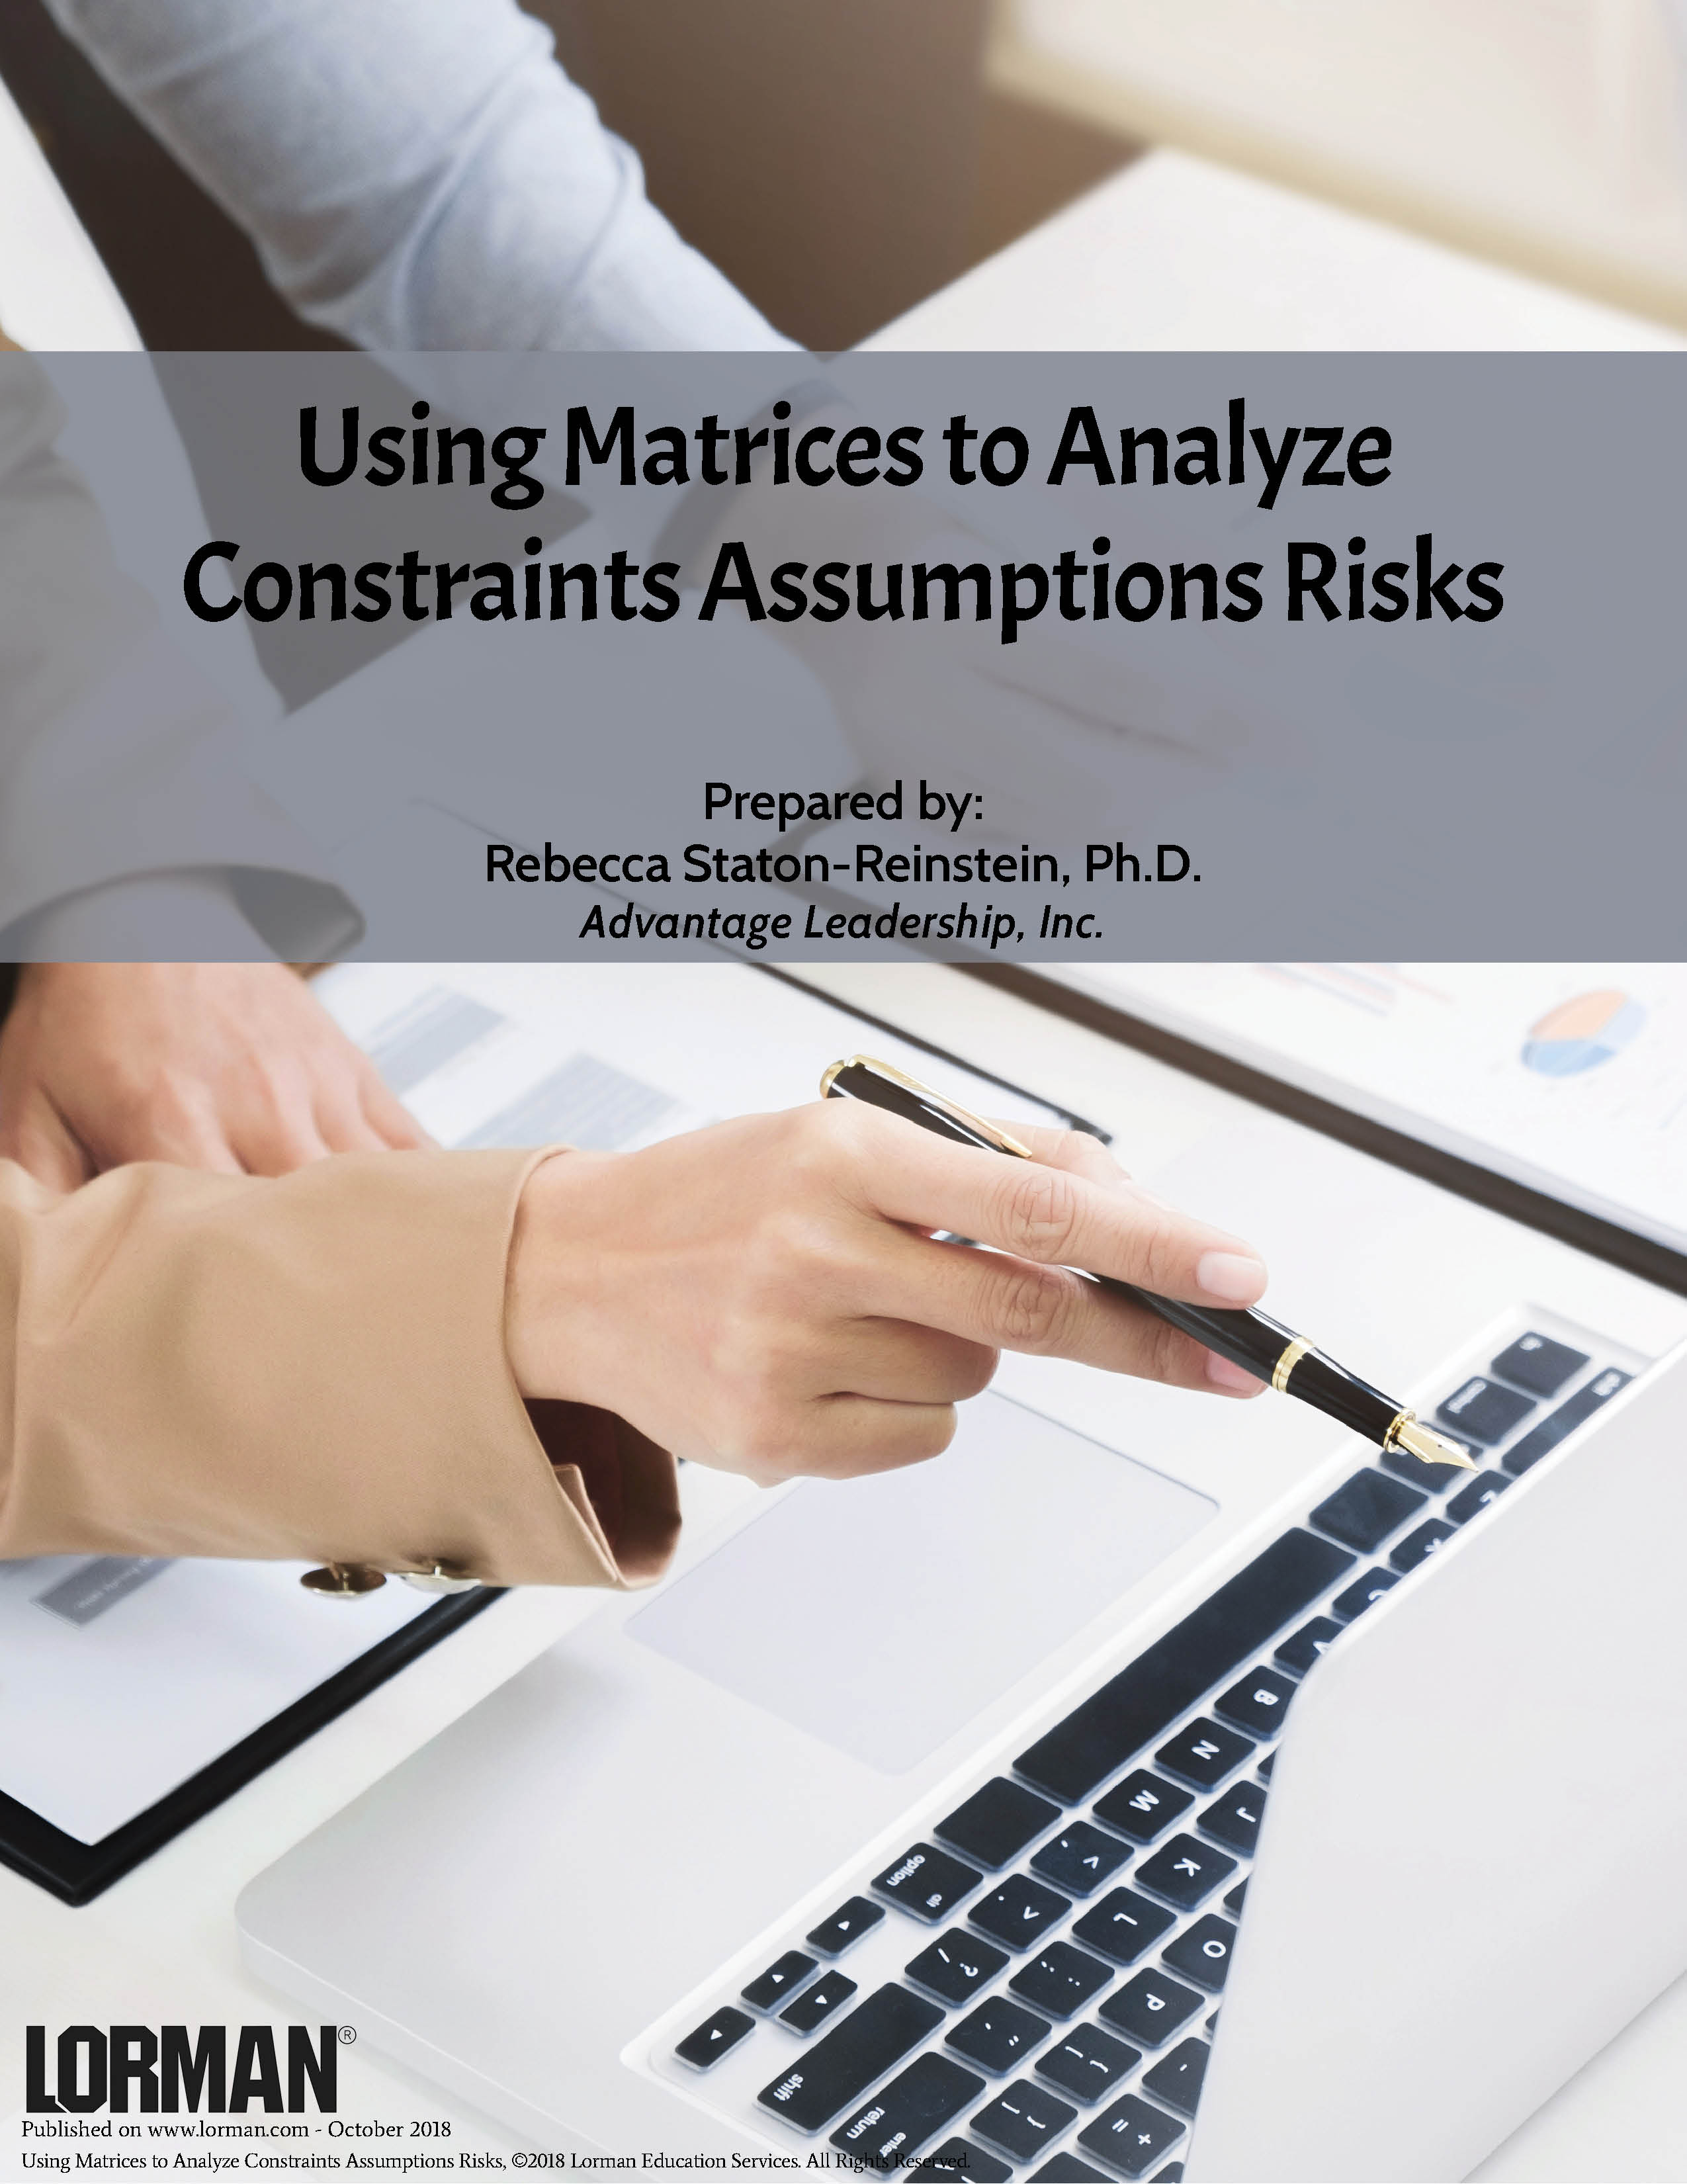 Using Matrices to Analyze Constraints Assumptions Risks